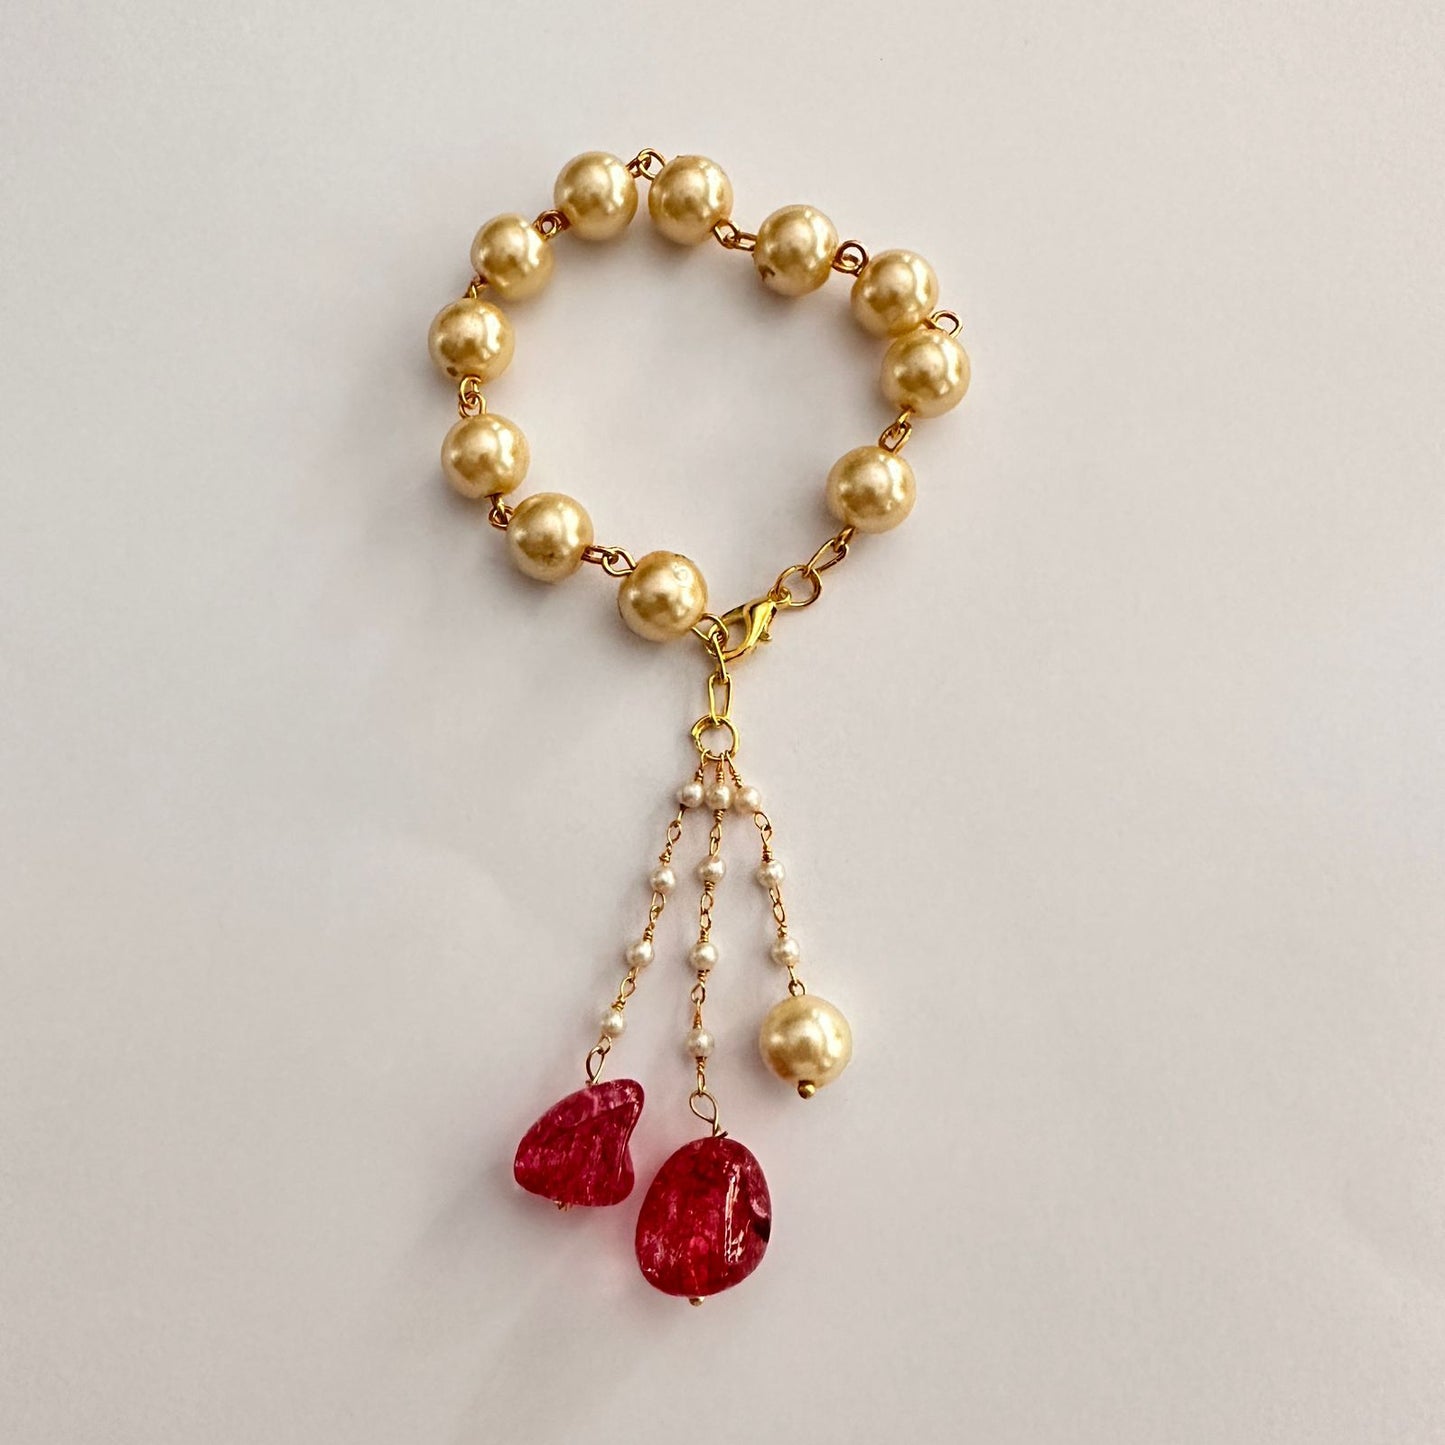 OFF-WHITE PERAL GOLD PLATED CHAIN WITH RUBY STONE BRACELET FOR WOMEN